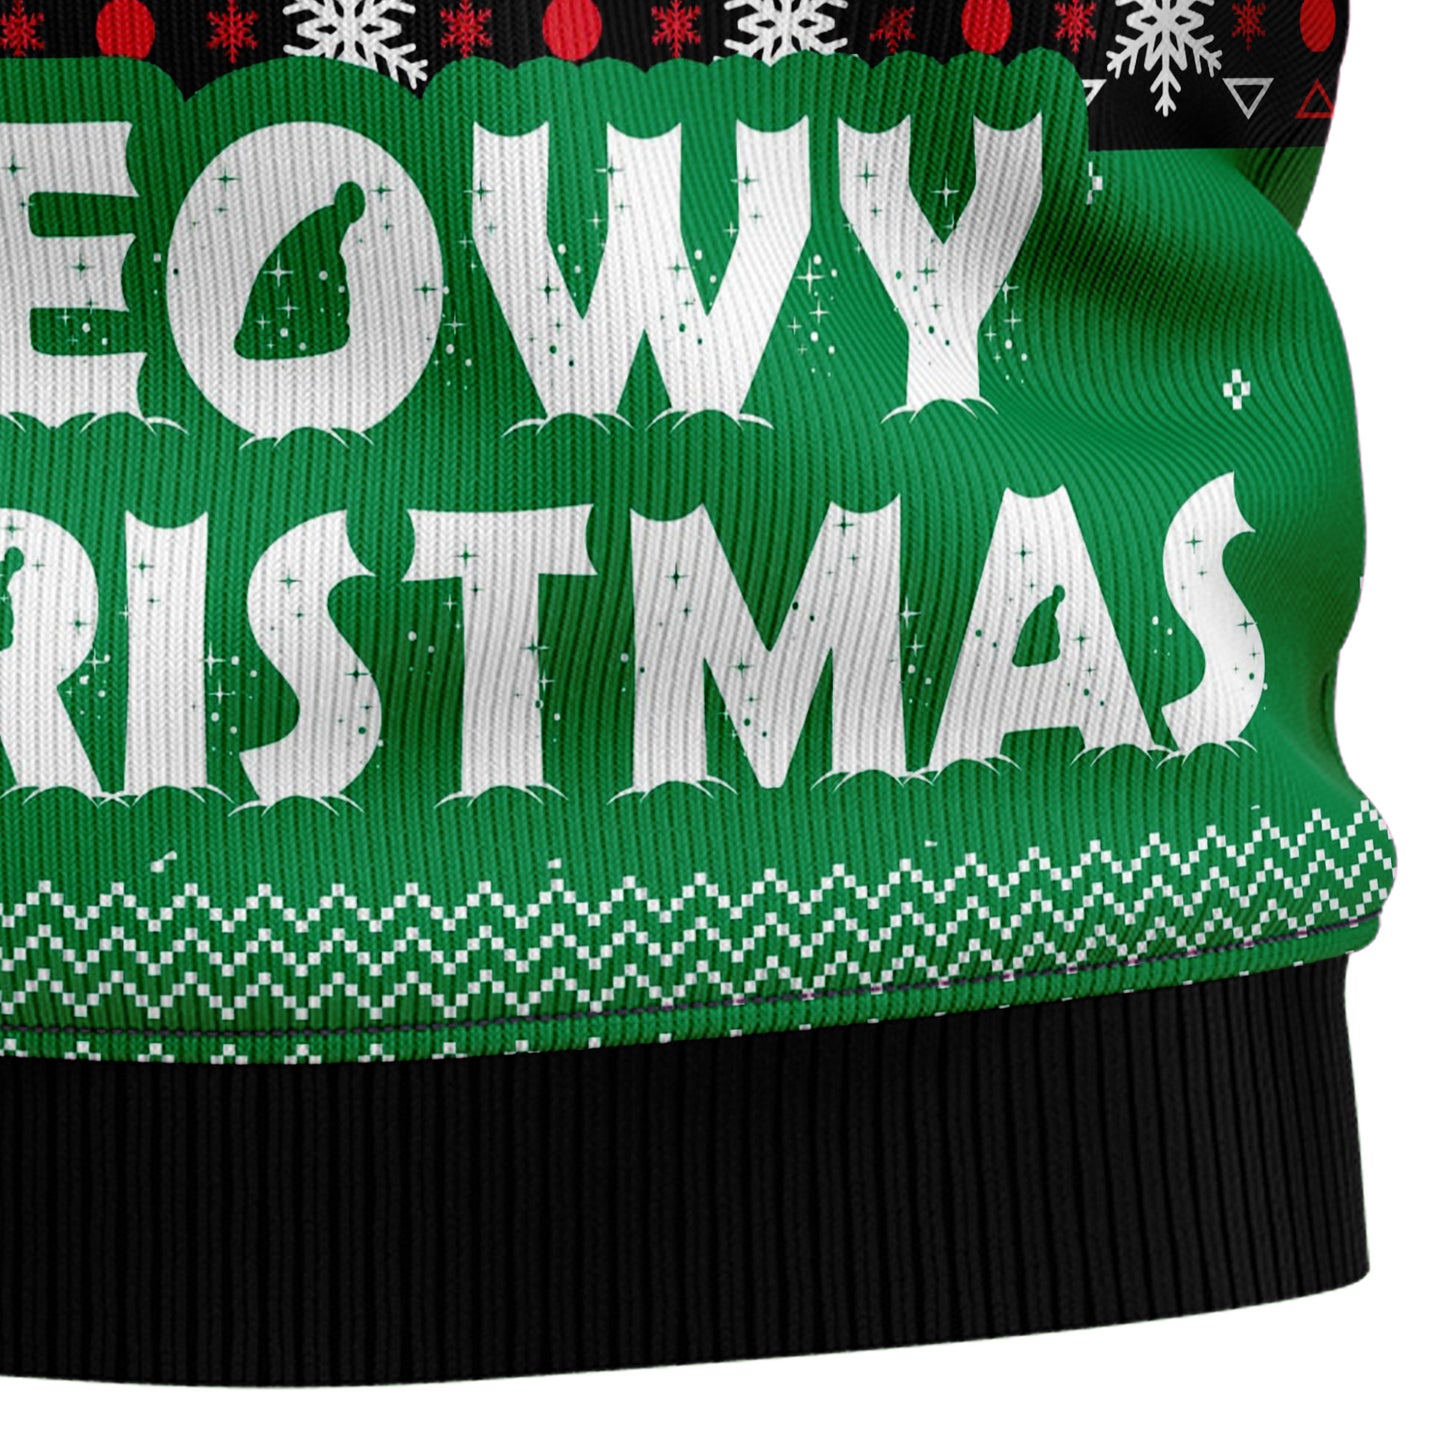 Meowy Black Cat TG5119 Ugly Christmas Sweater